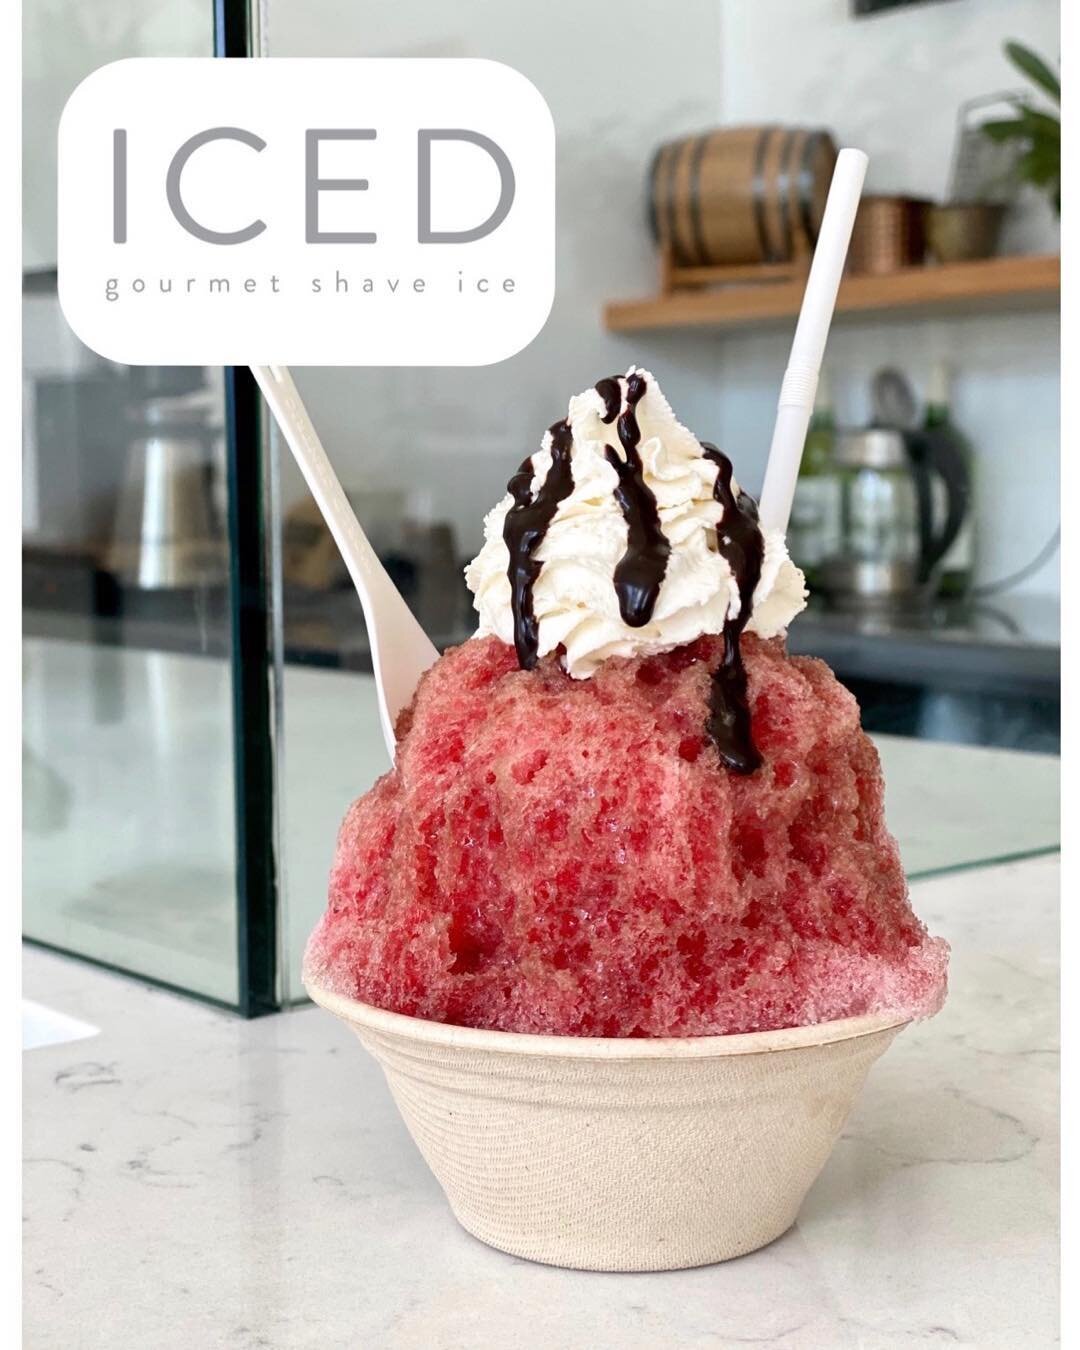 Shaved ice is back tomorrow Friday @ noon at #sideboarddanville #shavedice @icedgourmetshaveice